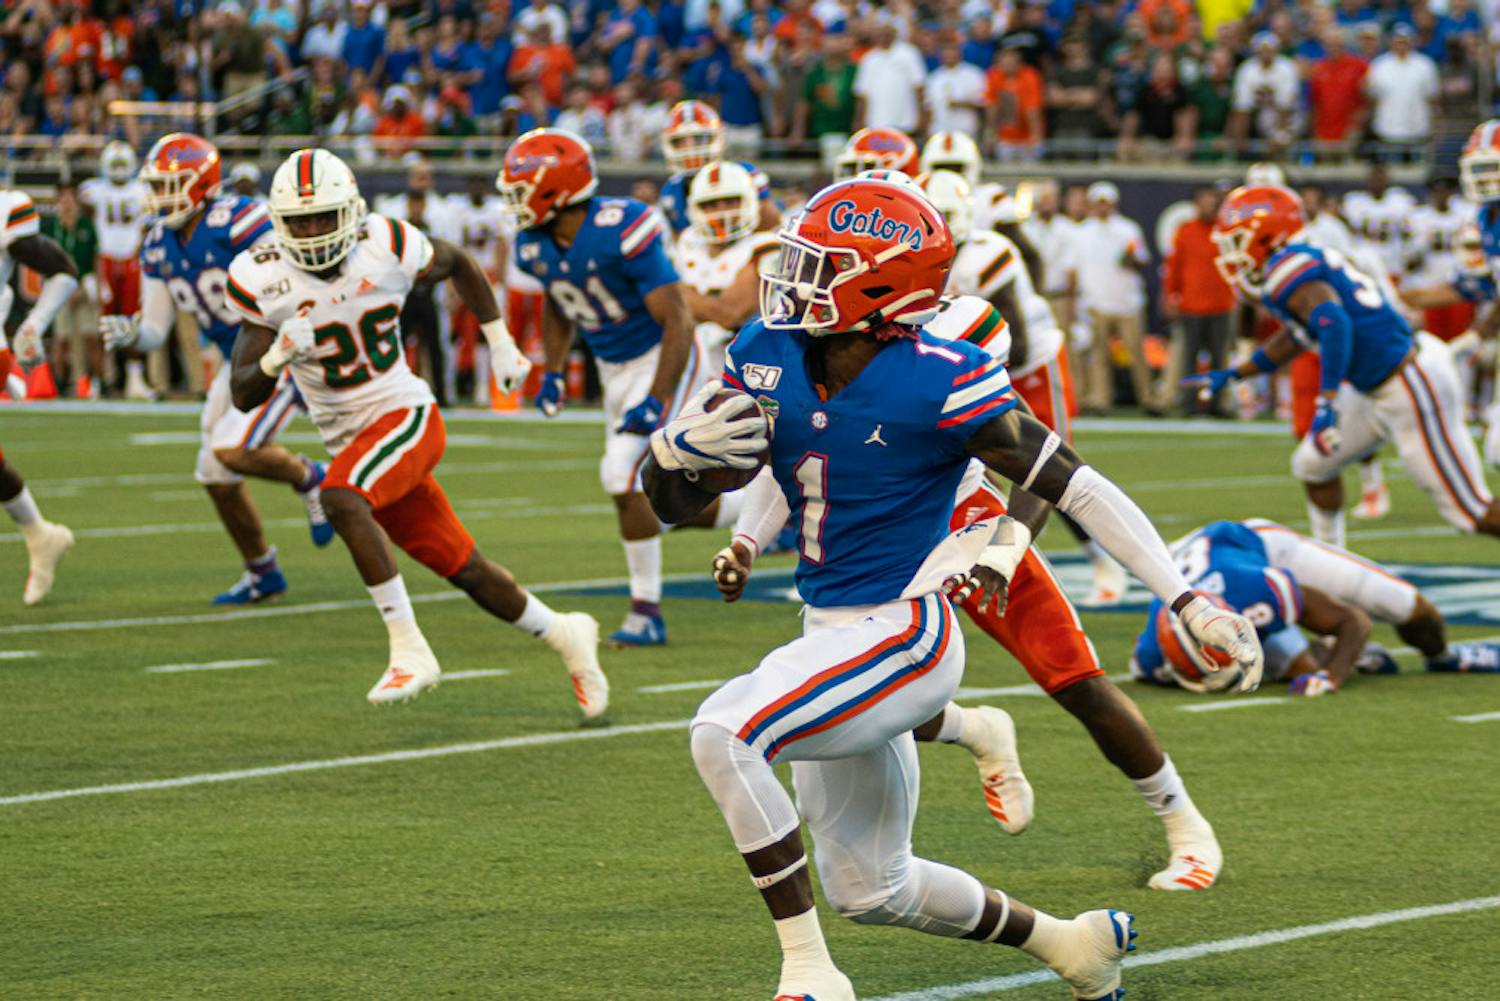 Receiver Kadarius Toney, pictured against Miami in 2019, was drafted 20th overall in the NFL Draft Thursday night and is now a member of the New York Giants.